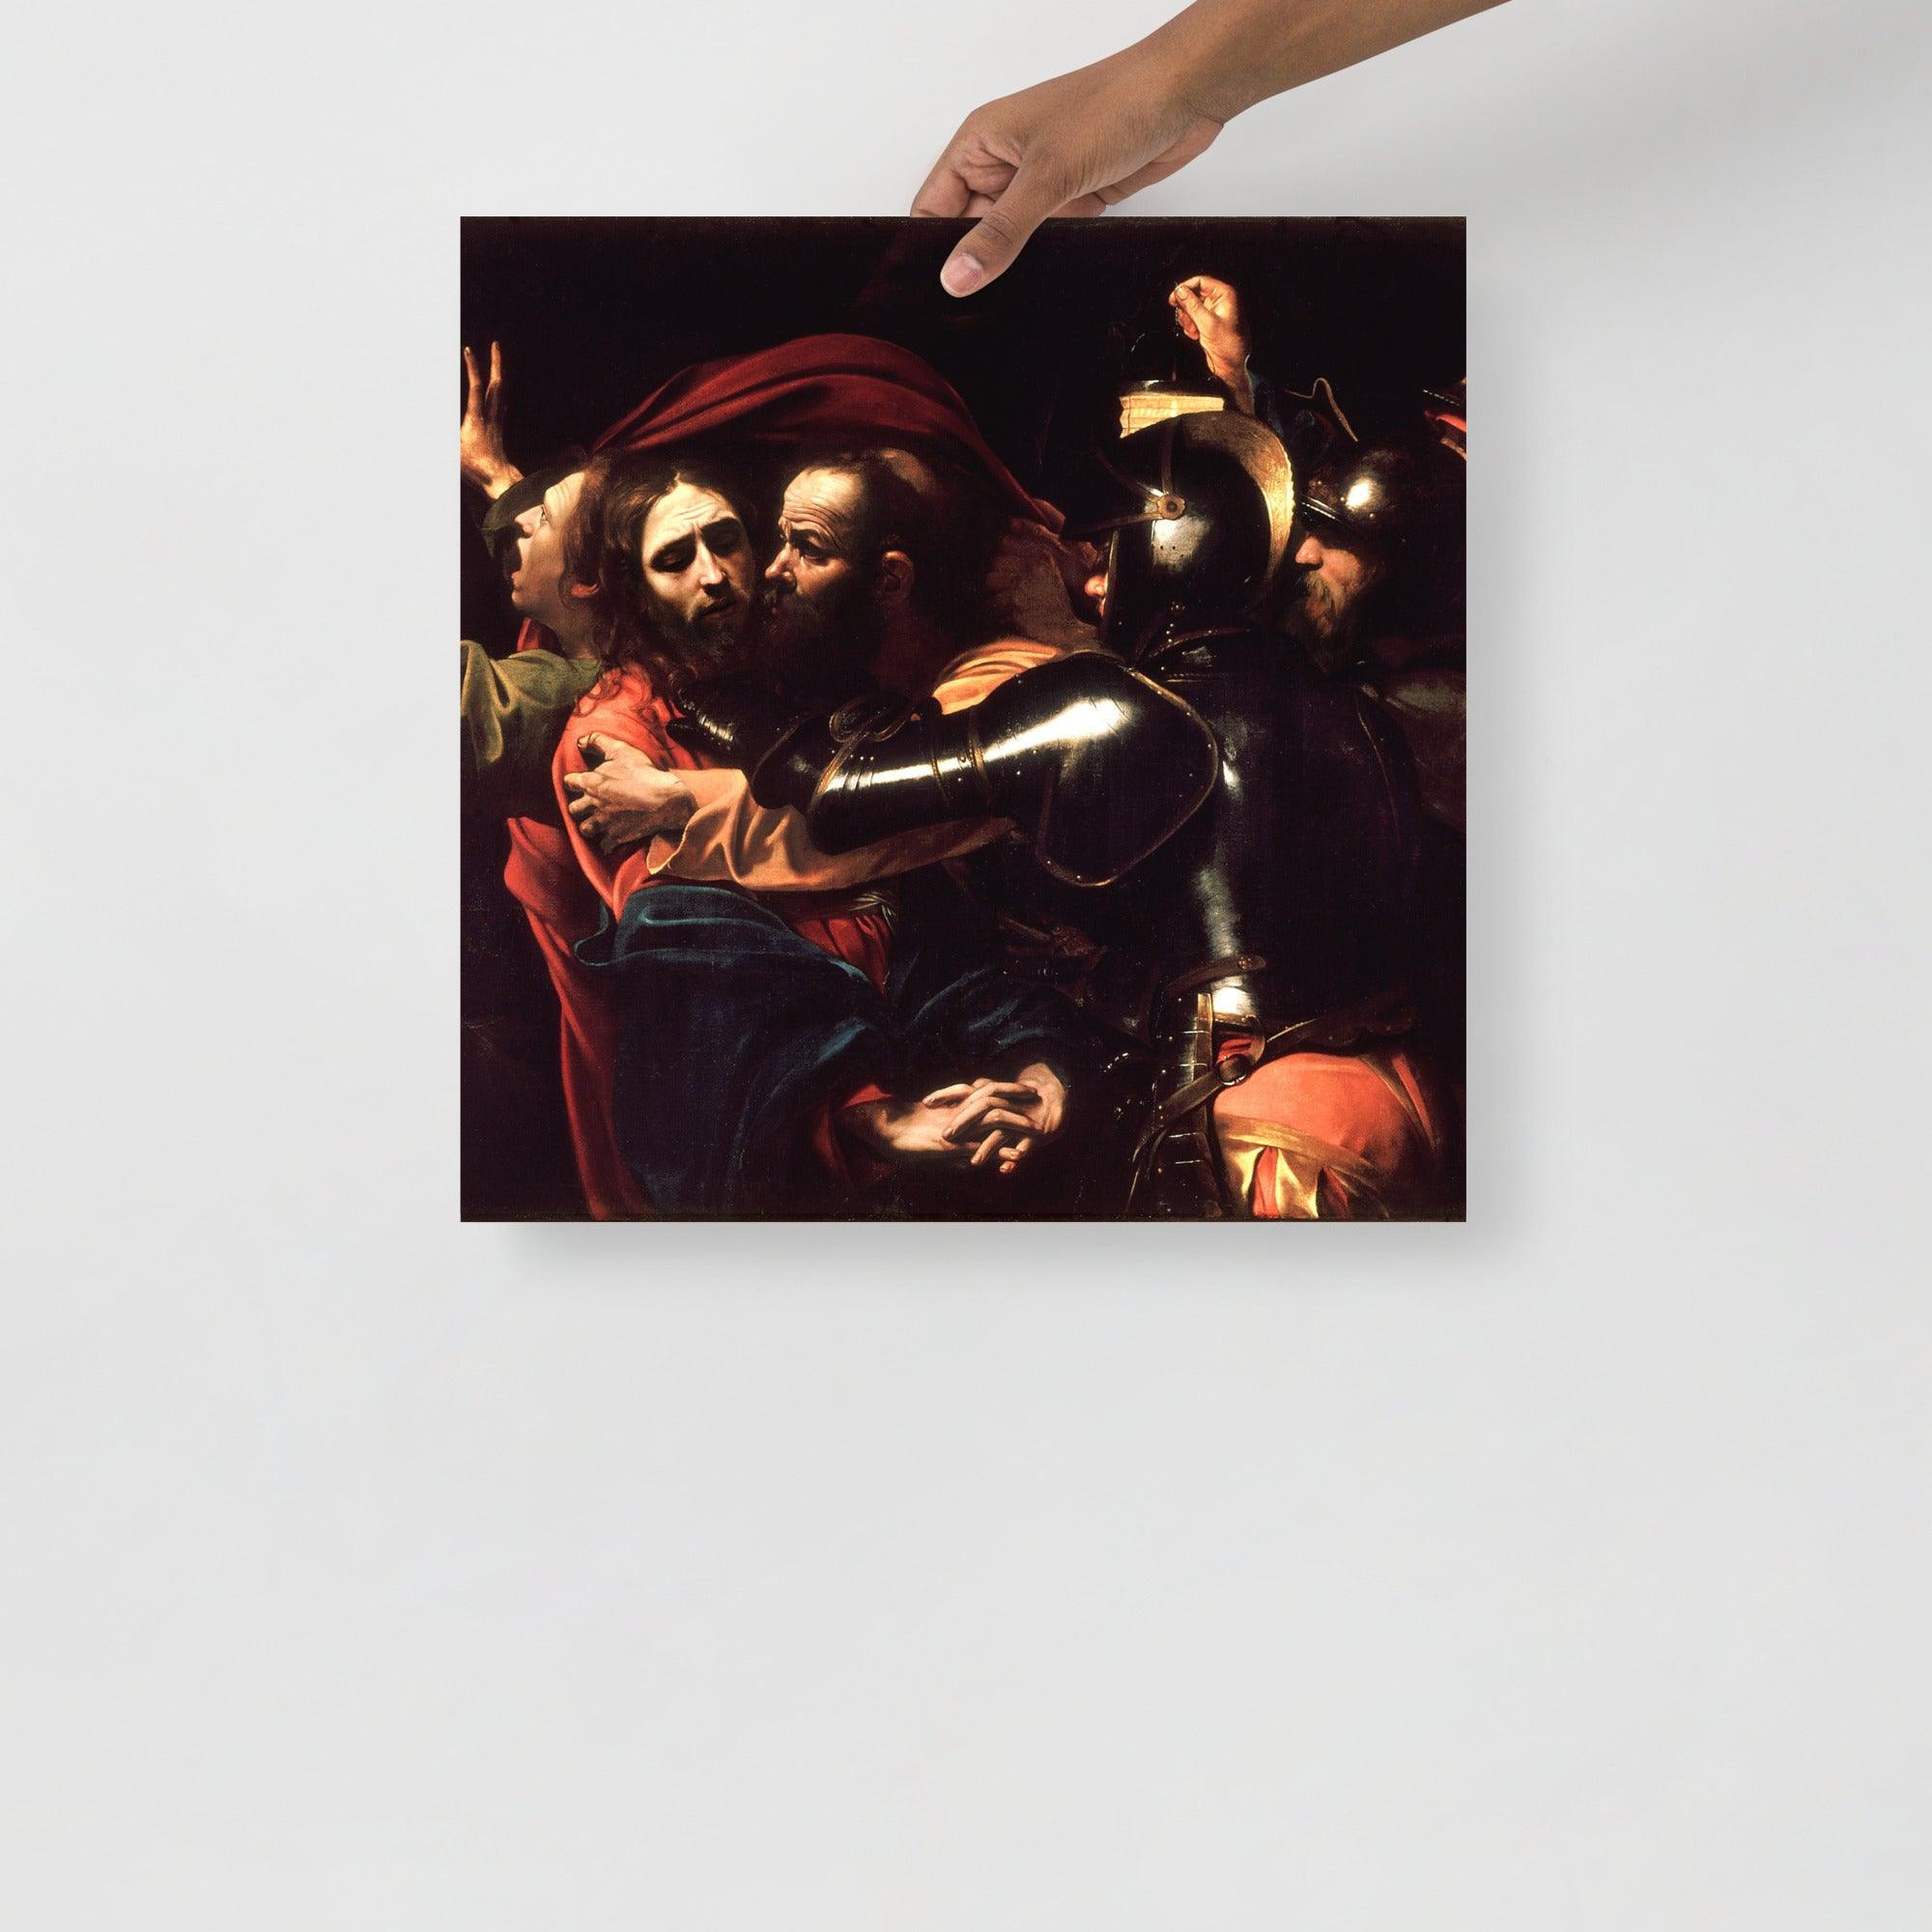 The Taking of Christ by Caravaggio poster on a plain backdrop in size 18x18”.